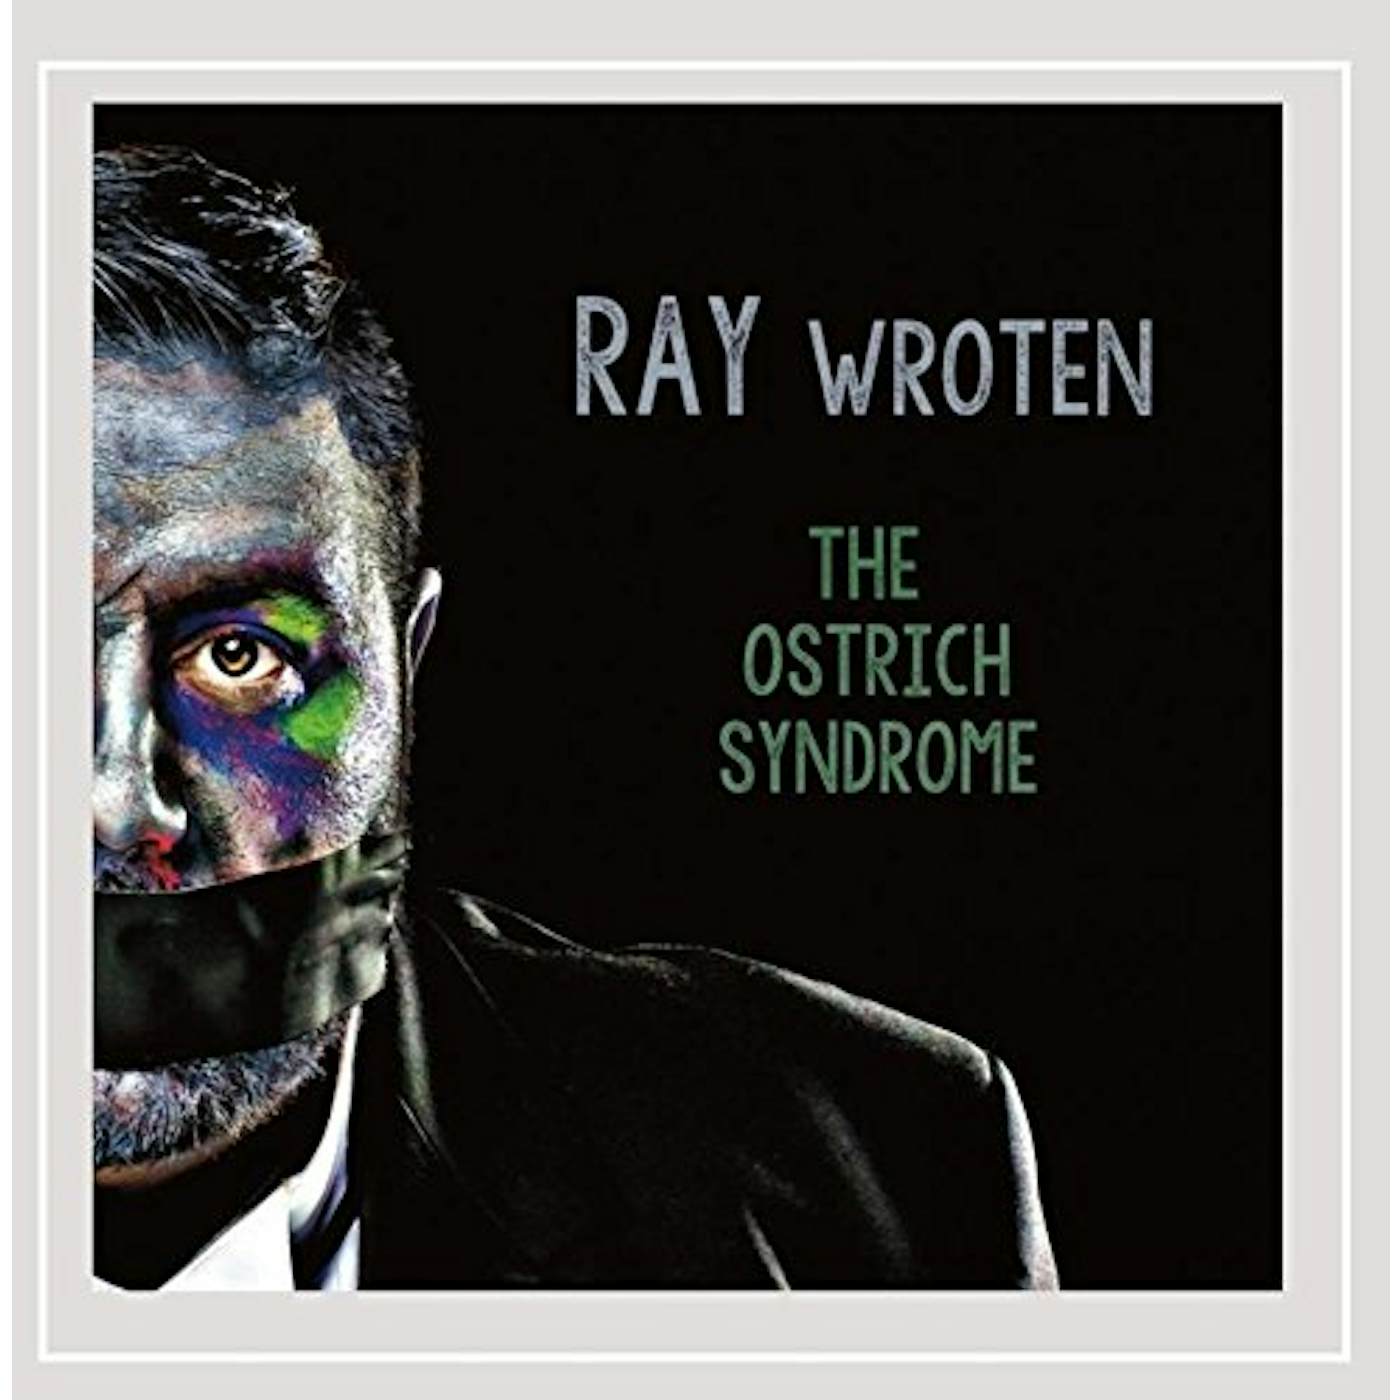 Ray Wroten OSTRICH SYNDROME CD